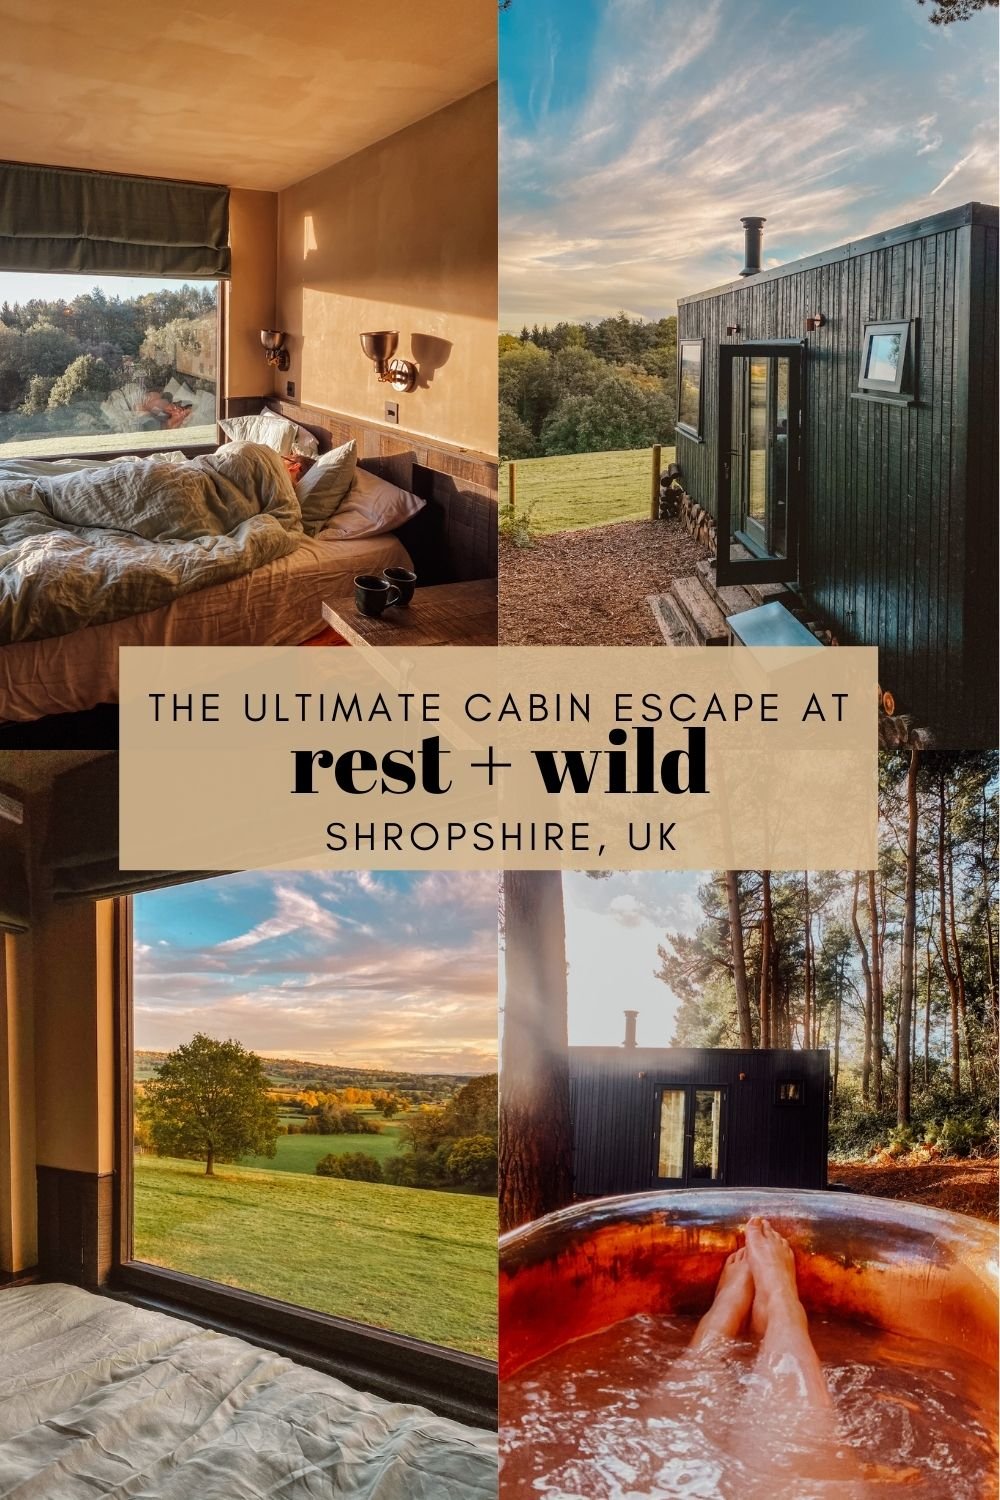 A stay at Rest + Wild, Shropshire